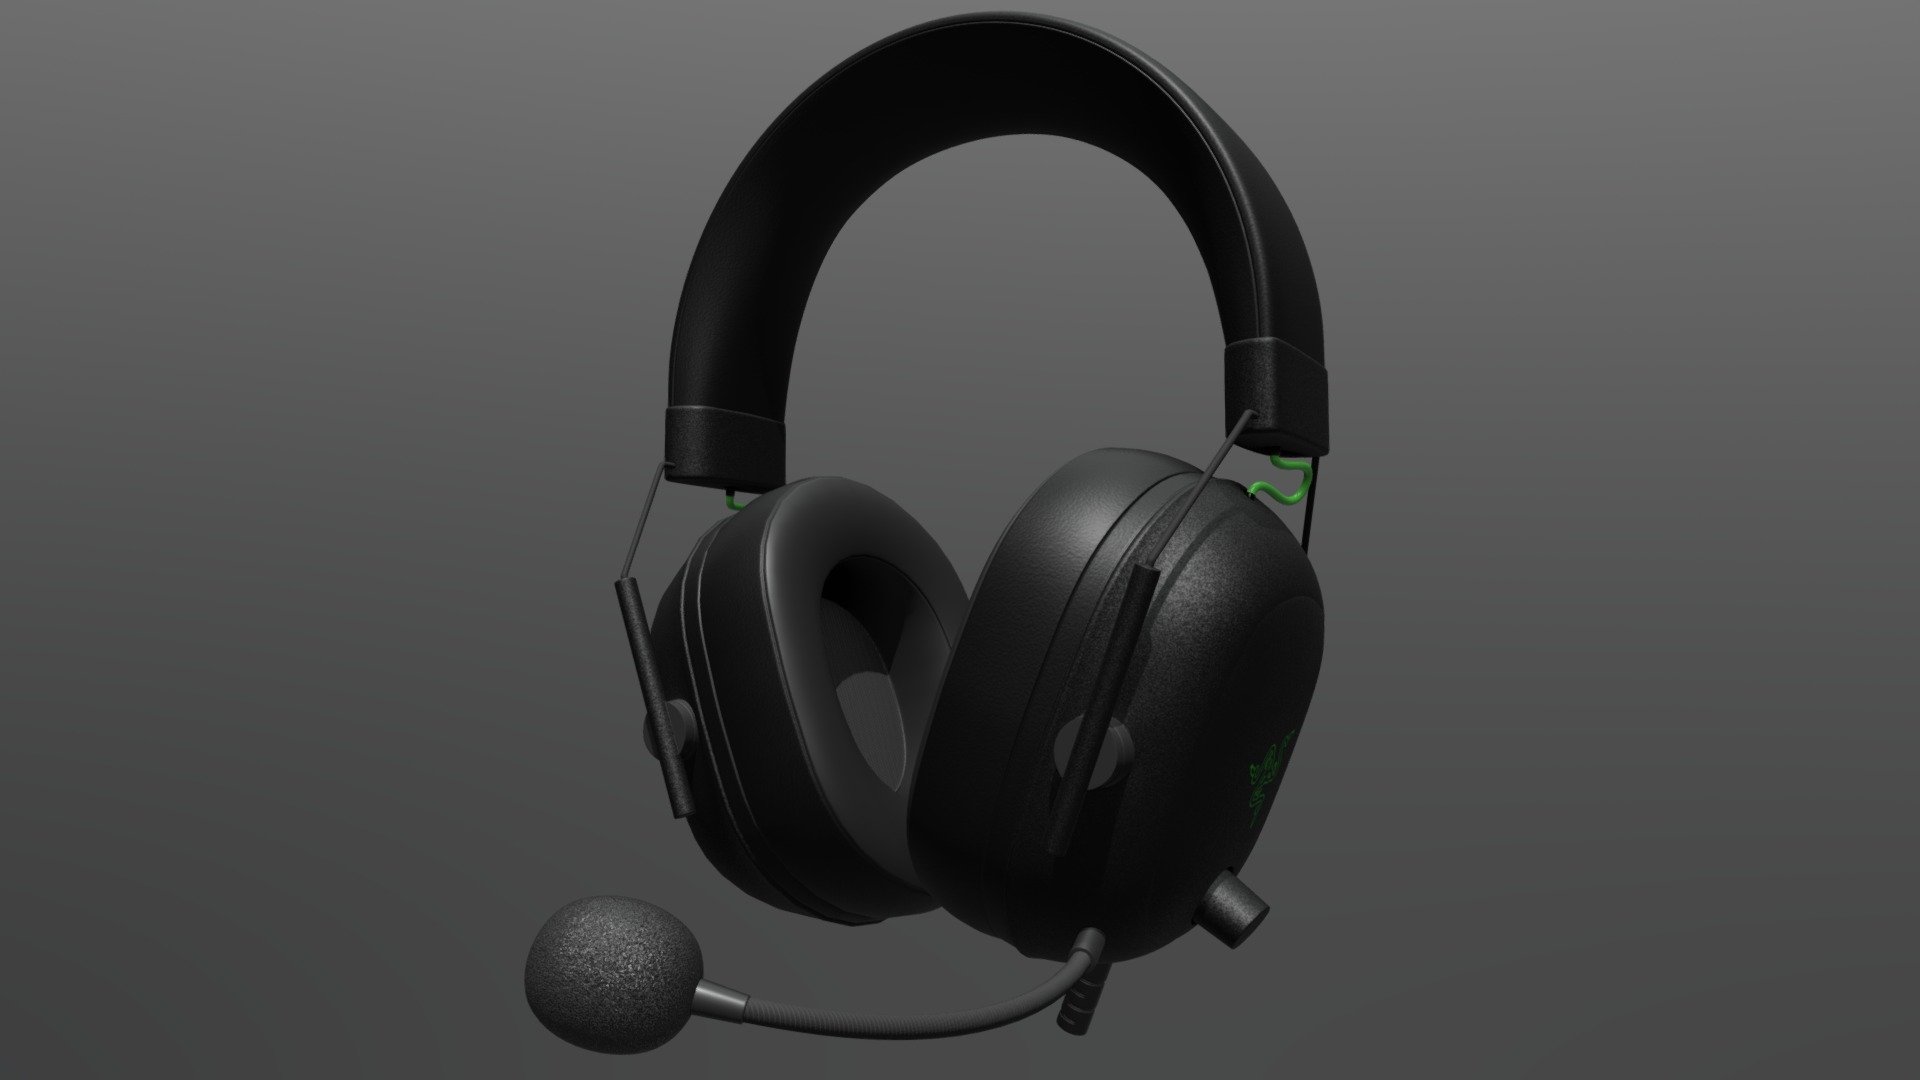 A highly detailed model of the RAZER Black Shark headset

All maps are 4K

-Diffuse -Metalness -Roughness -Normal -Ambient Occlusion

5 Formats available

-Blend -OBJ -FBX -x3d -stl

Model is made and rendered in Blender with Cycles

This model is available for download in CGTrader and Turbo squid

Thanks for viewing! - Razer Black Shark - 3D model by Levi Abon (@Lance.Abon) 3d model